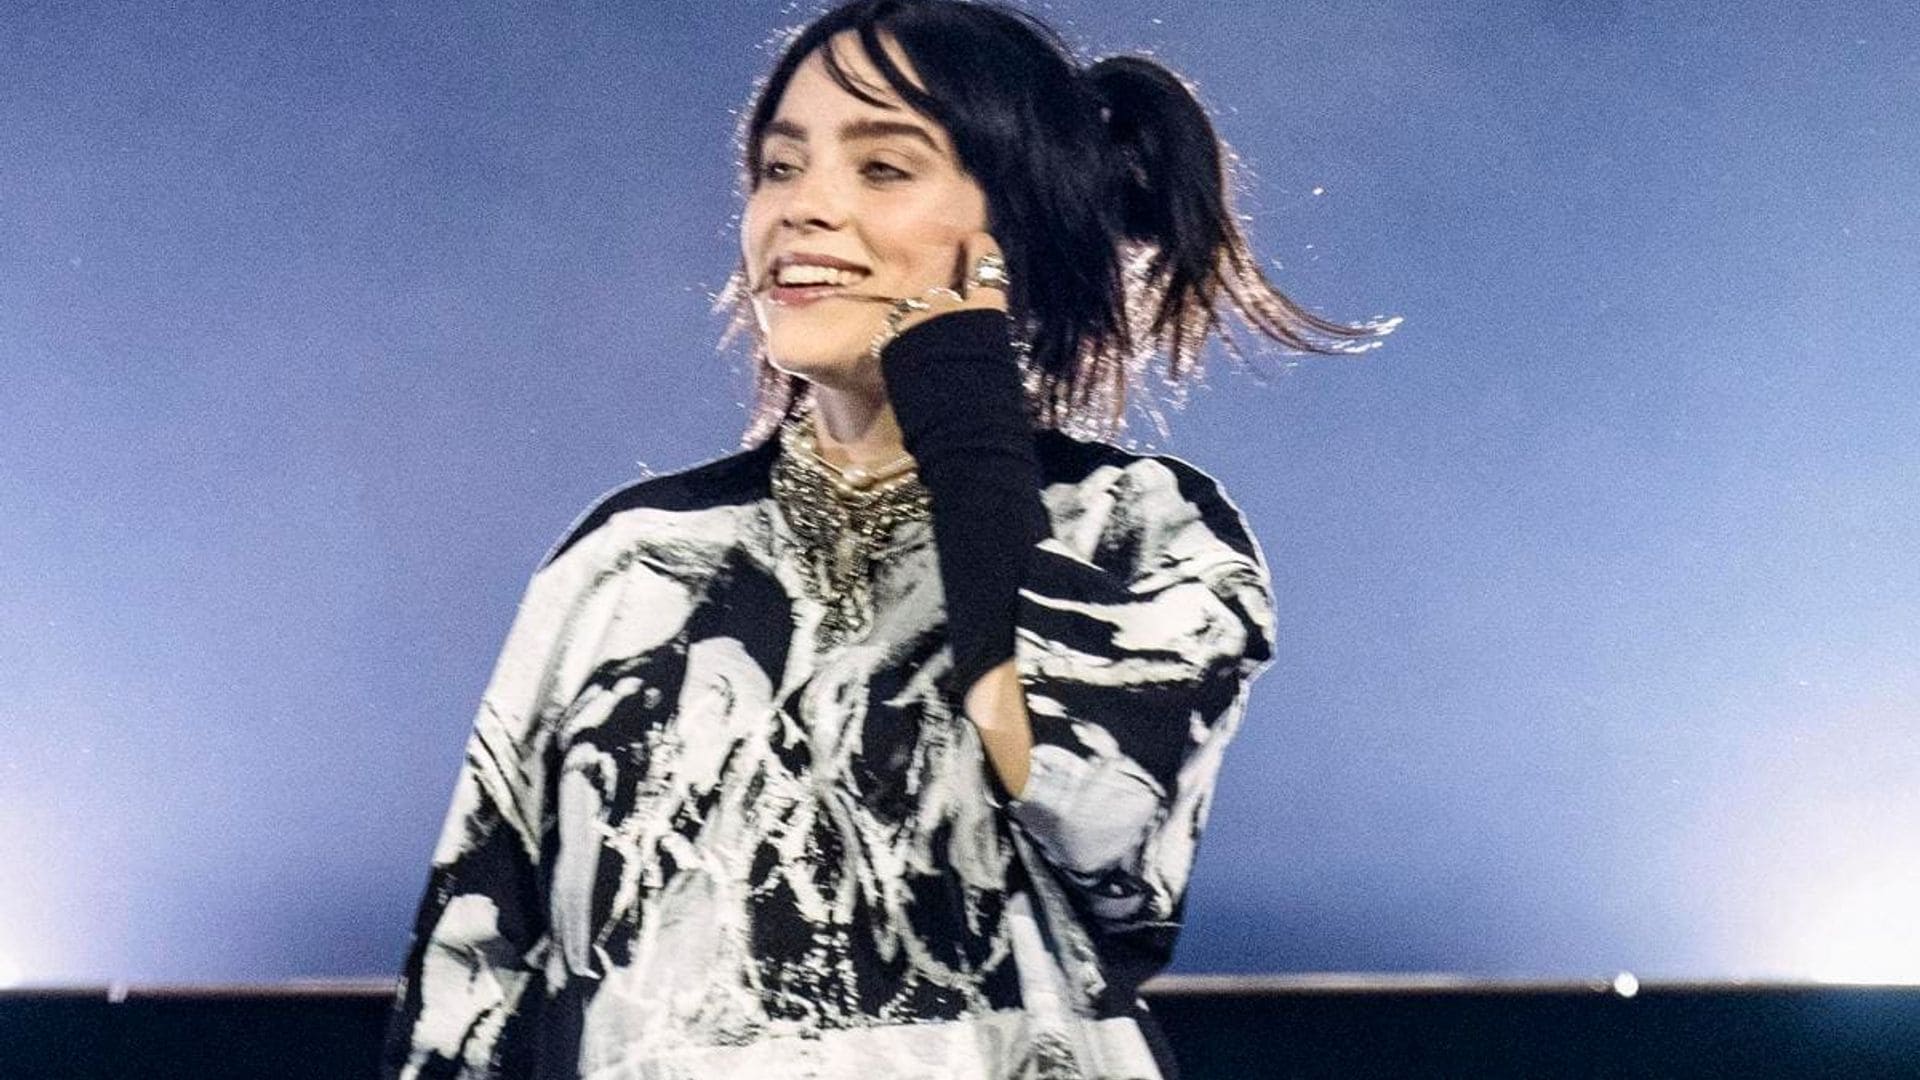 Billie Eilish reveals the hardest thing about being on tour: ‘Feels like a blur’